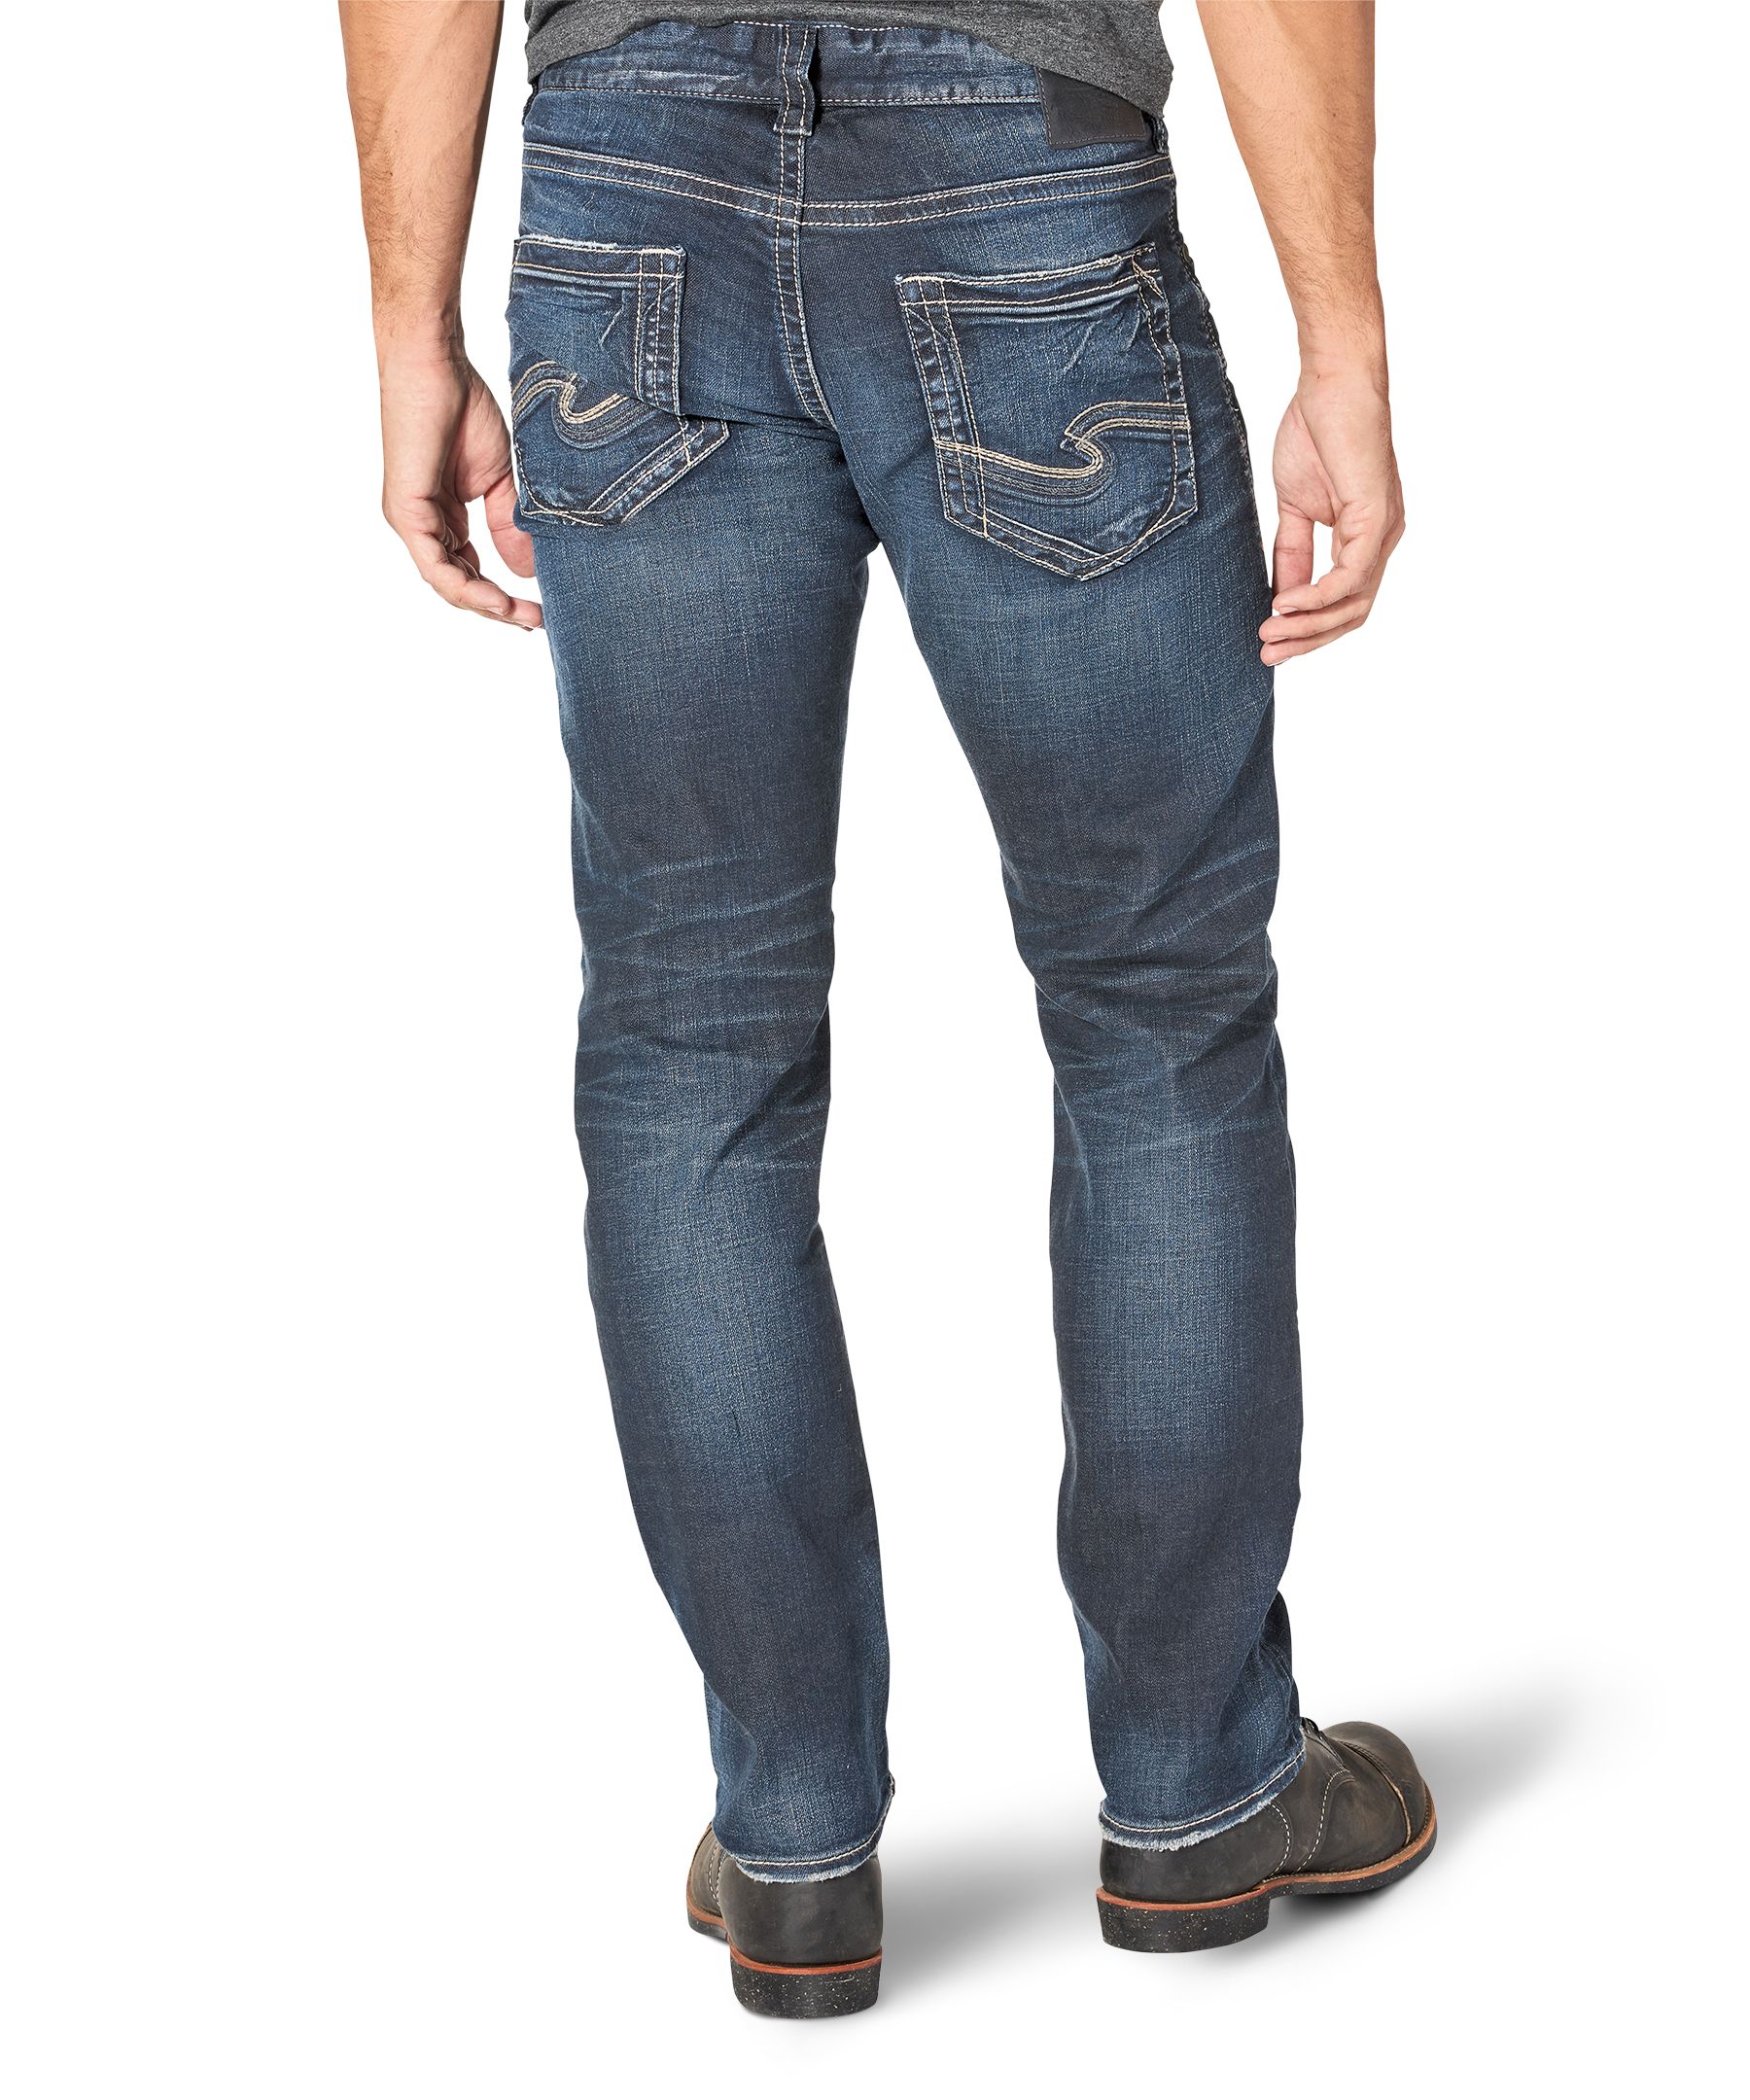 https://media-www.marks.com/product/mens-jeans/national-brands/silver/410017967423/silver-eddie-relaxed-fit-tape-dark-wash-30-30-5dd1bf2e-d707-4122-9d6b-343444711a0b-jpgrendition.jpg?imdensity=1&imwidth=1244&impolicy=mZoom